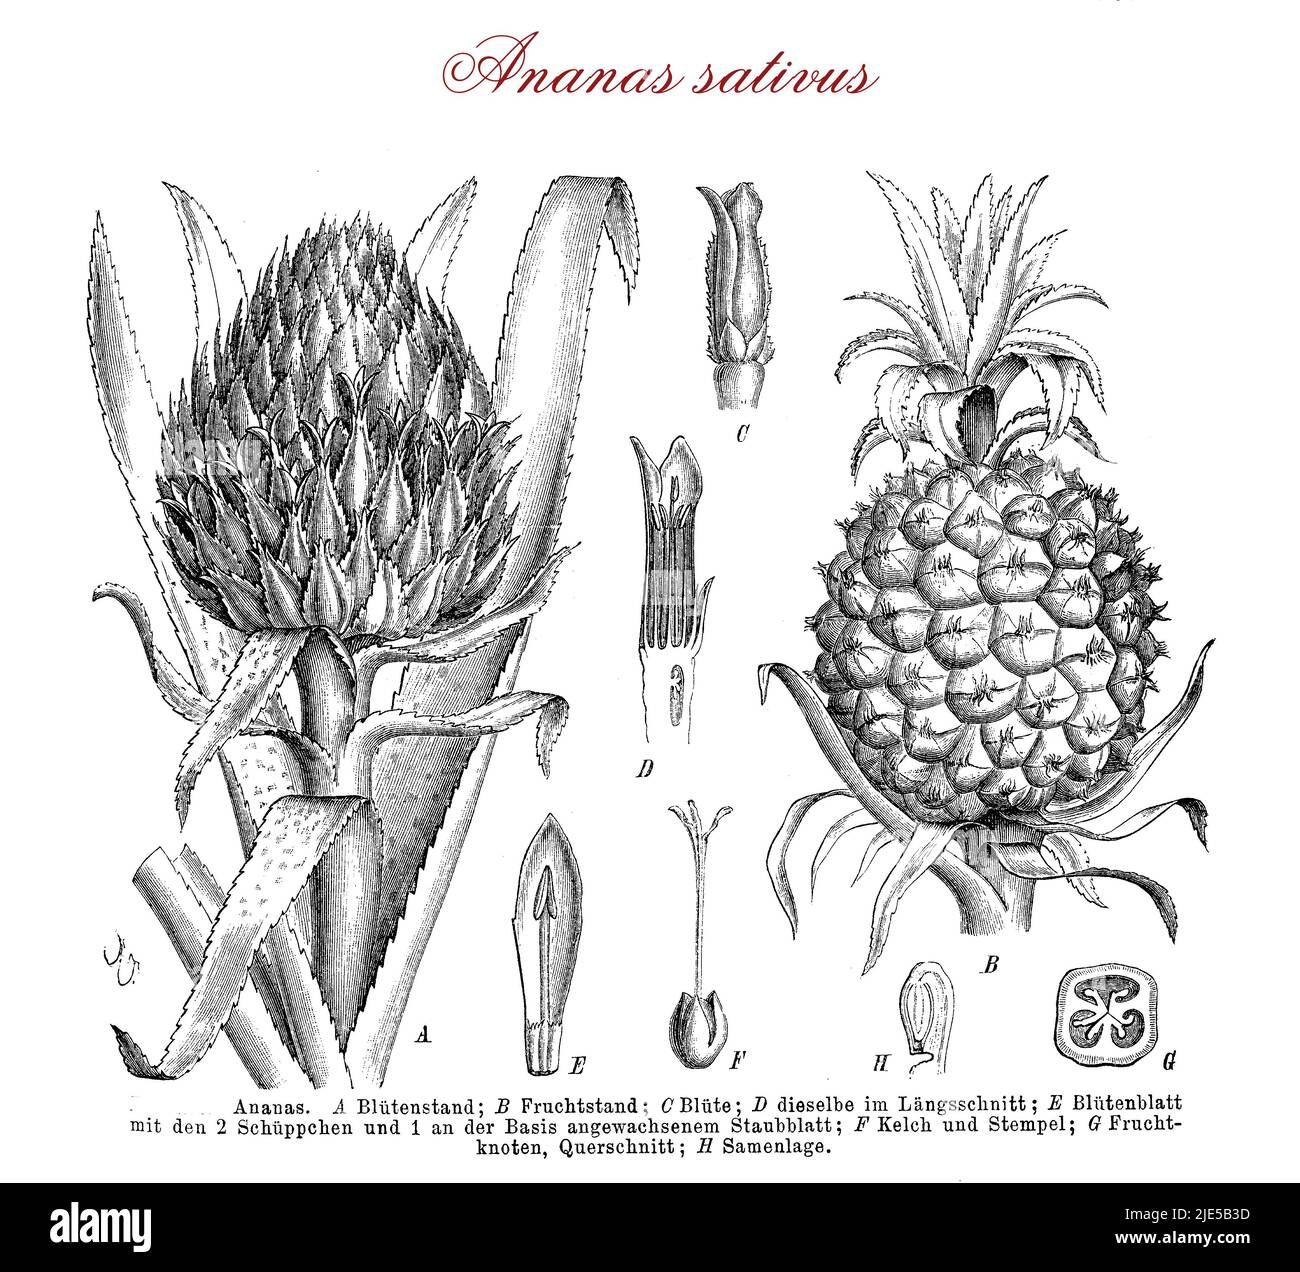 Vintage engraving of  pineapple, tropical plant pollinated by hummingbirds with edible delicious multiple fruit, consumed fresh, cooked, juiced or preserved. Descriptions in German. Stock Photo